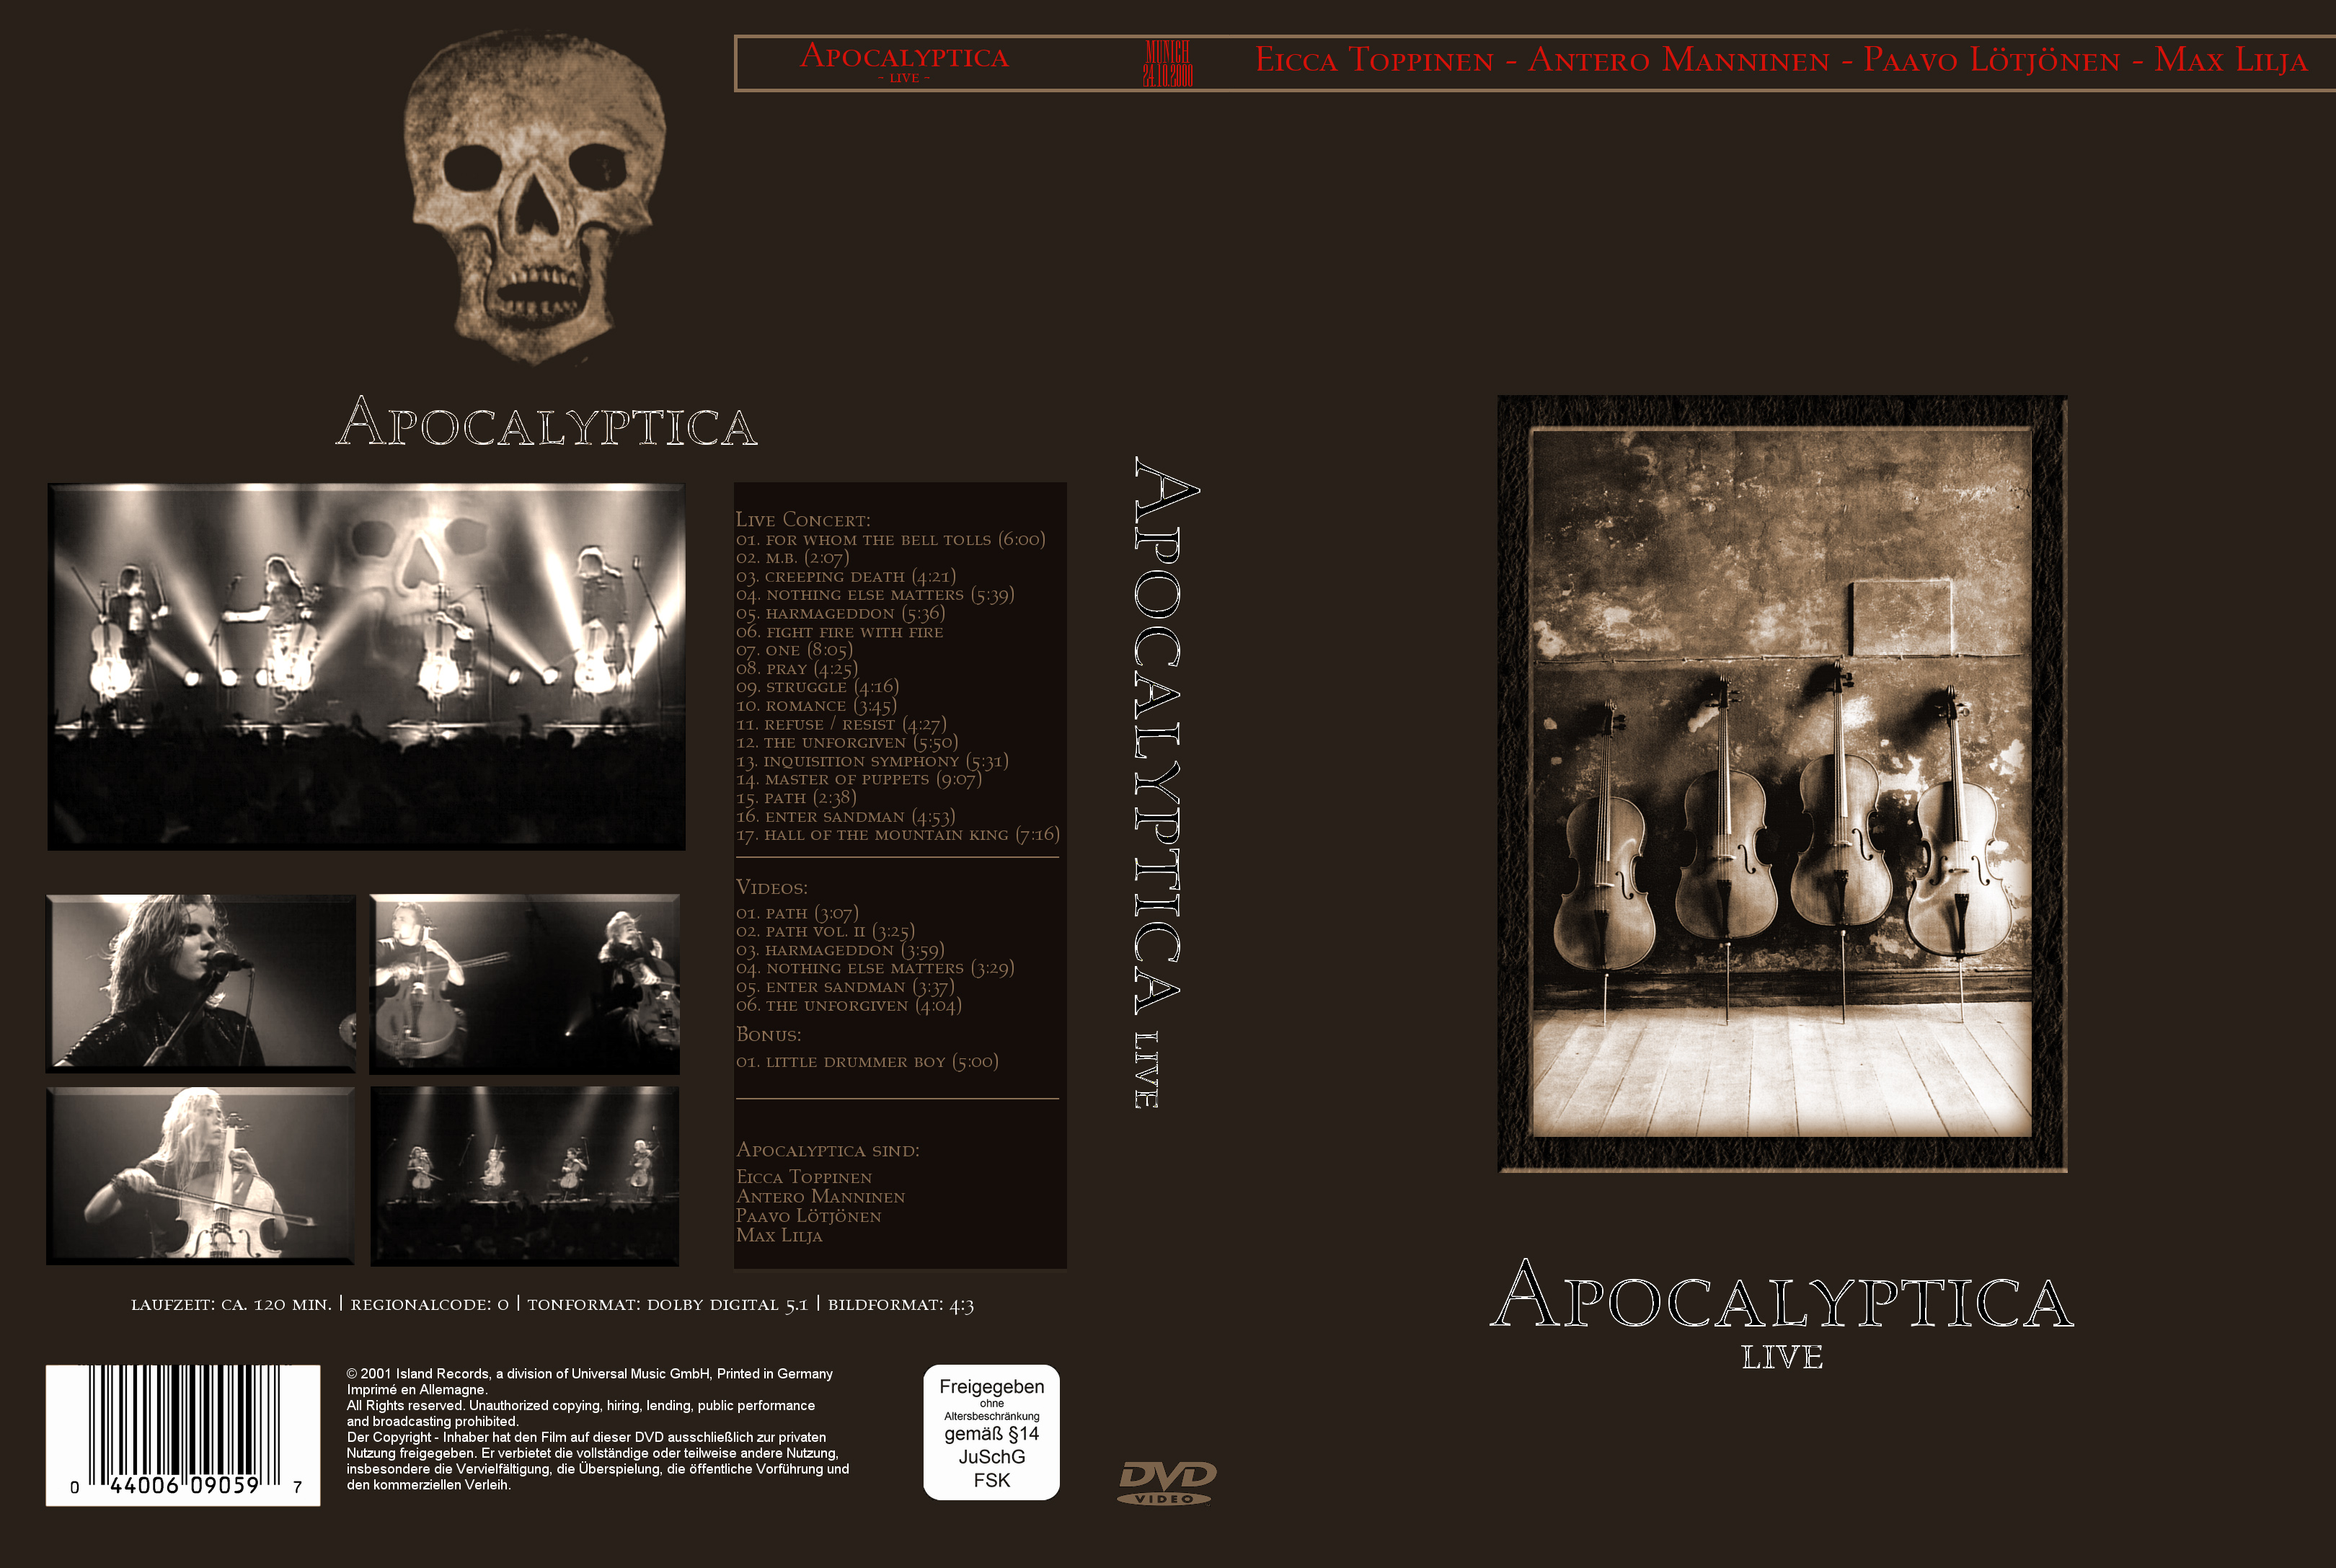 covery DVD - Apocalyptica - Live - Cover2.jpg